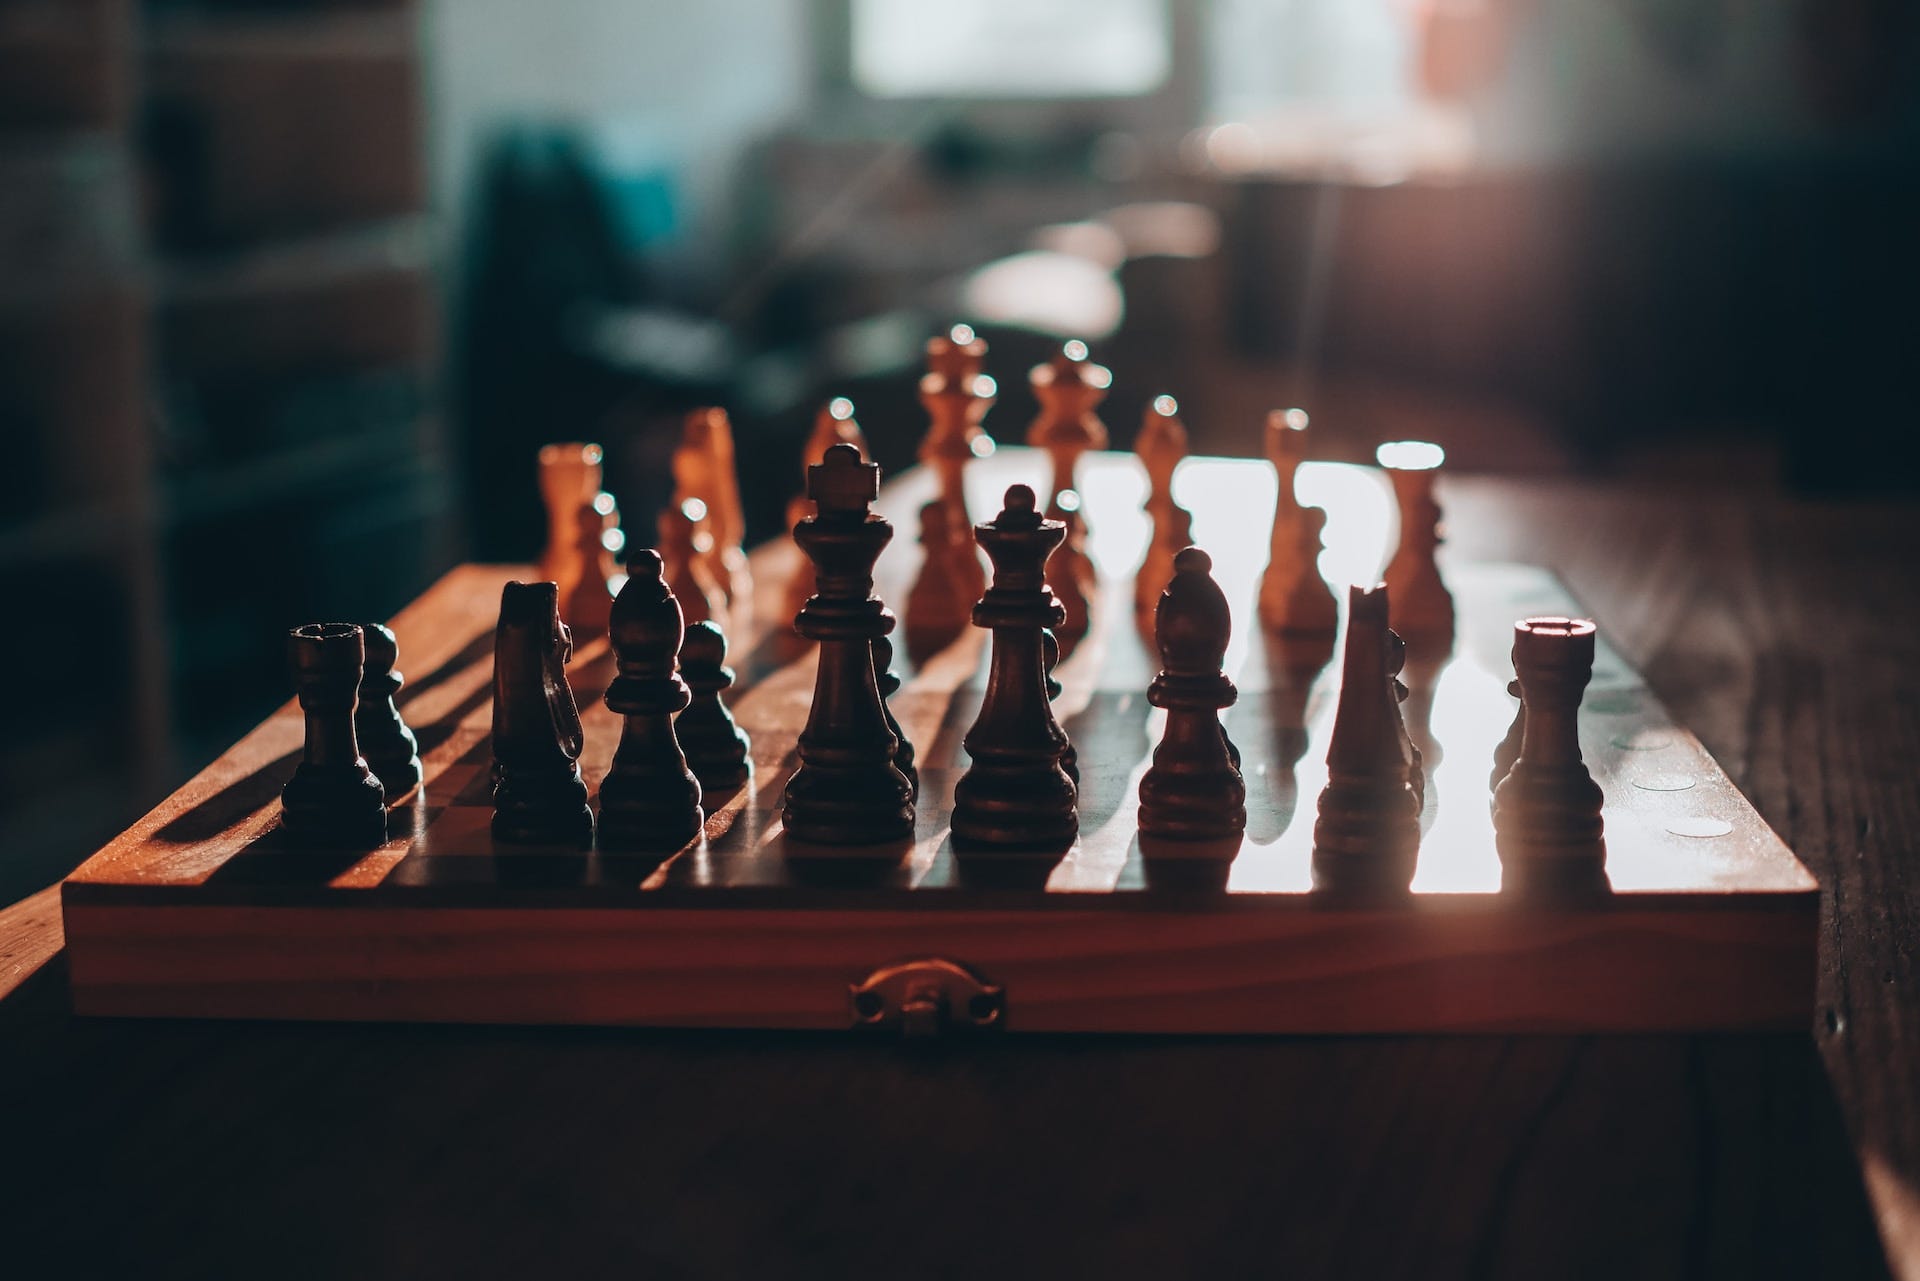 Drawing life lessons from chess - triangulation